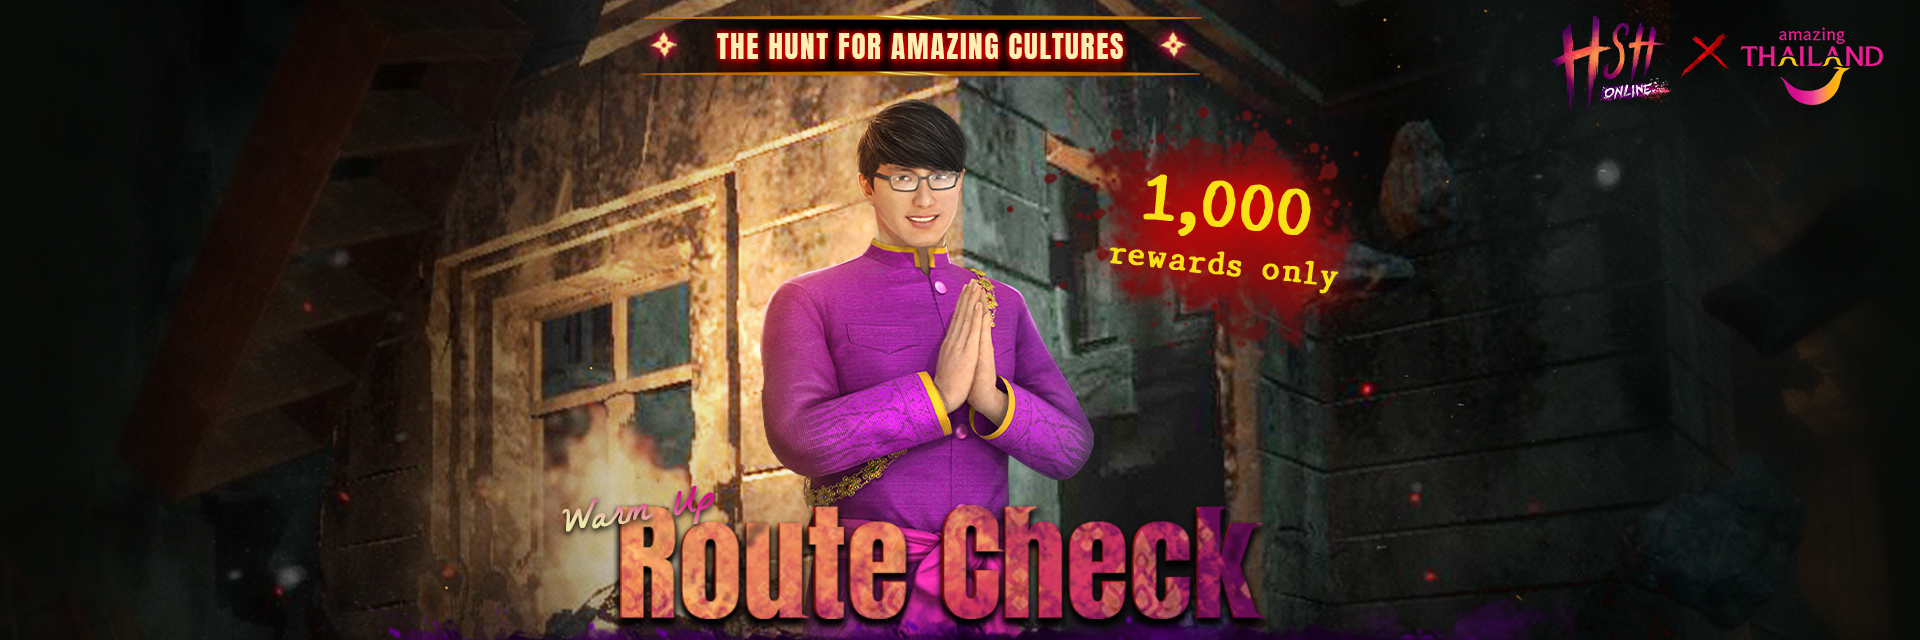 'The Hunt for Amazing Cultures’ announces rule changes and additional rewards for the Warm Up Route Check event!